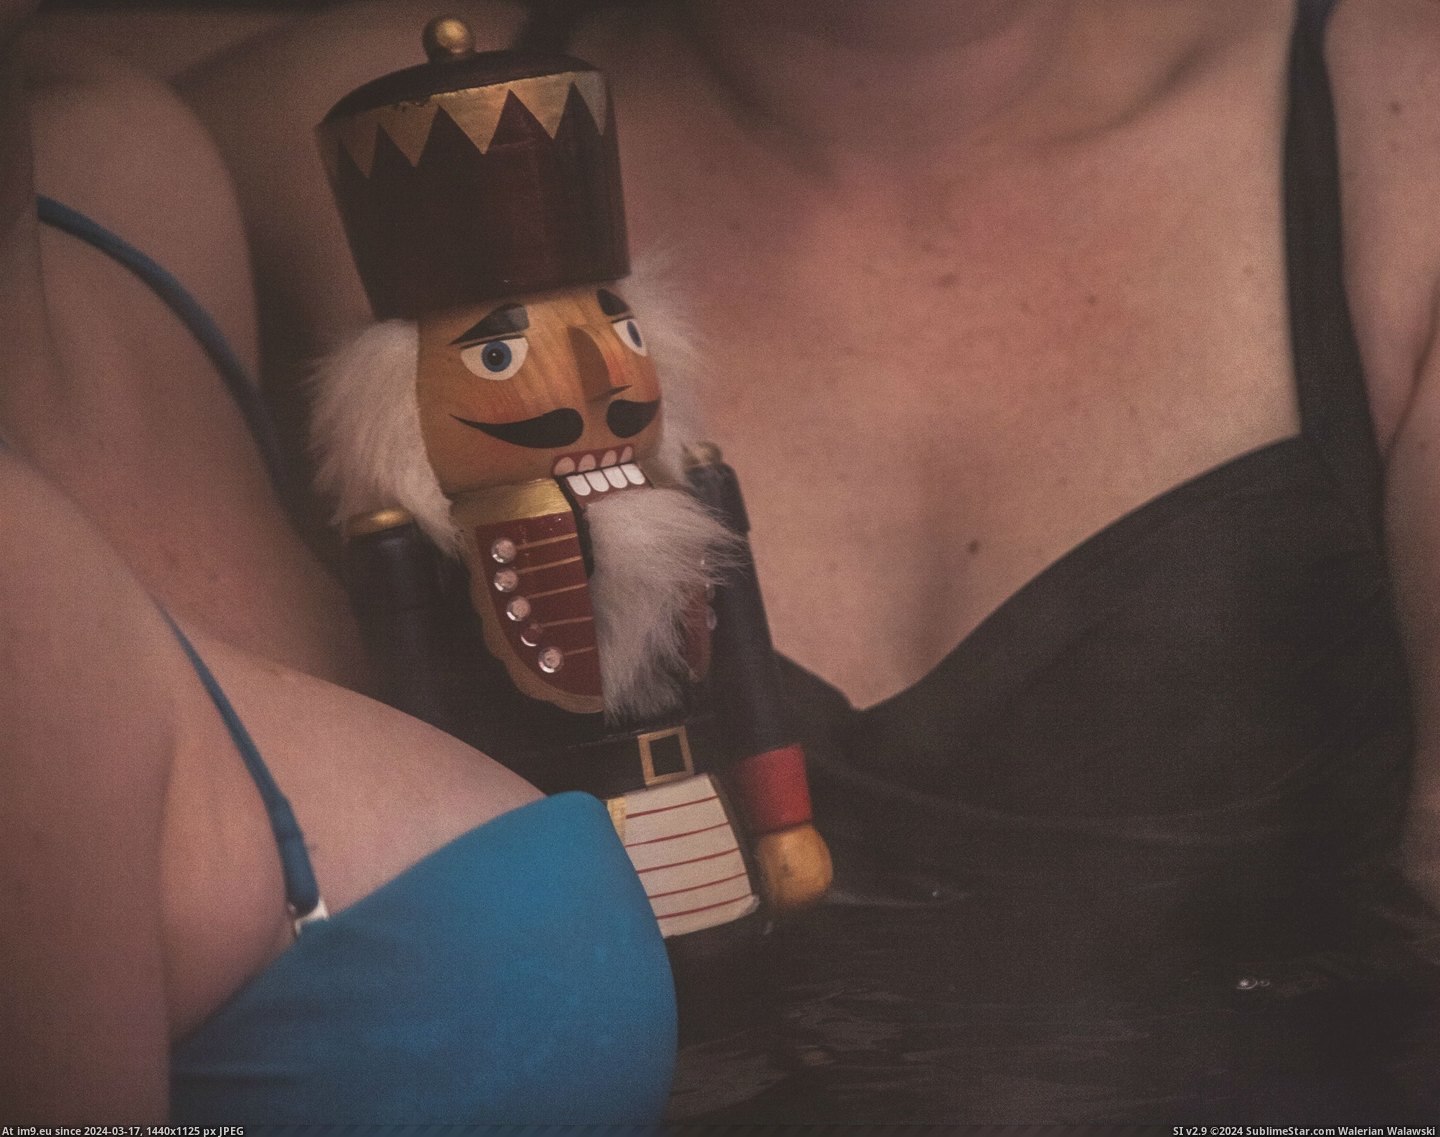 #For #Year #Friend #Stole #Nutcracker #Amazing #Christmas #Got [Pics] Last Christmas I stole my friend's nutcracker - this year, he got these back: 'most amazing thing anyone has done for me  Pic. (Bild von album My r/PICS favs))